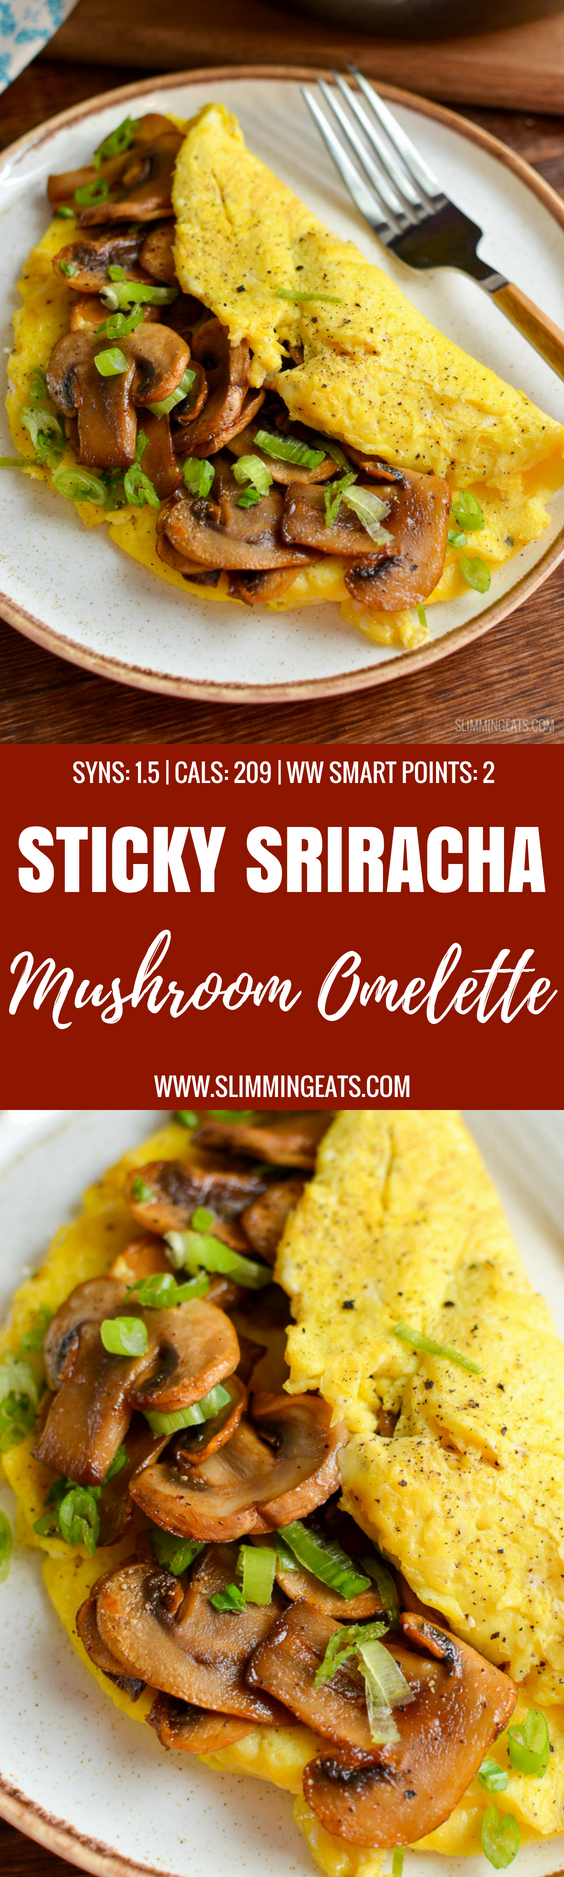 A sticky sriracha mushroom omelette recipe that is perfect for breakfast, lunch or dinner. Delicious fluffy omelette with spicy sweet sticky sriracha mushrooms. Perfect!! - gluten free, dairy free, vegetarian, Slimming World and Weight Watchers friendly #slimmingworld #weightwatchers #breakfast #eggs #mushrooms #sriracha